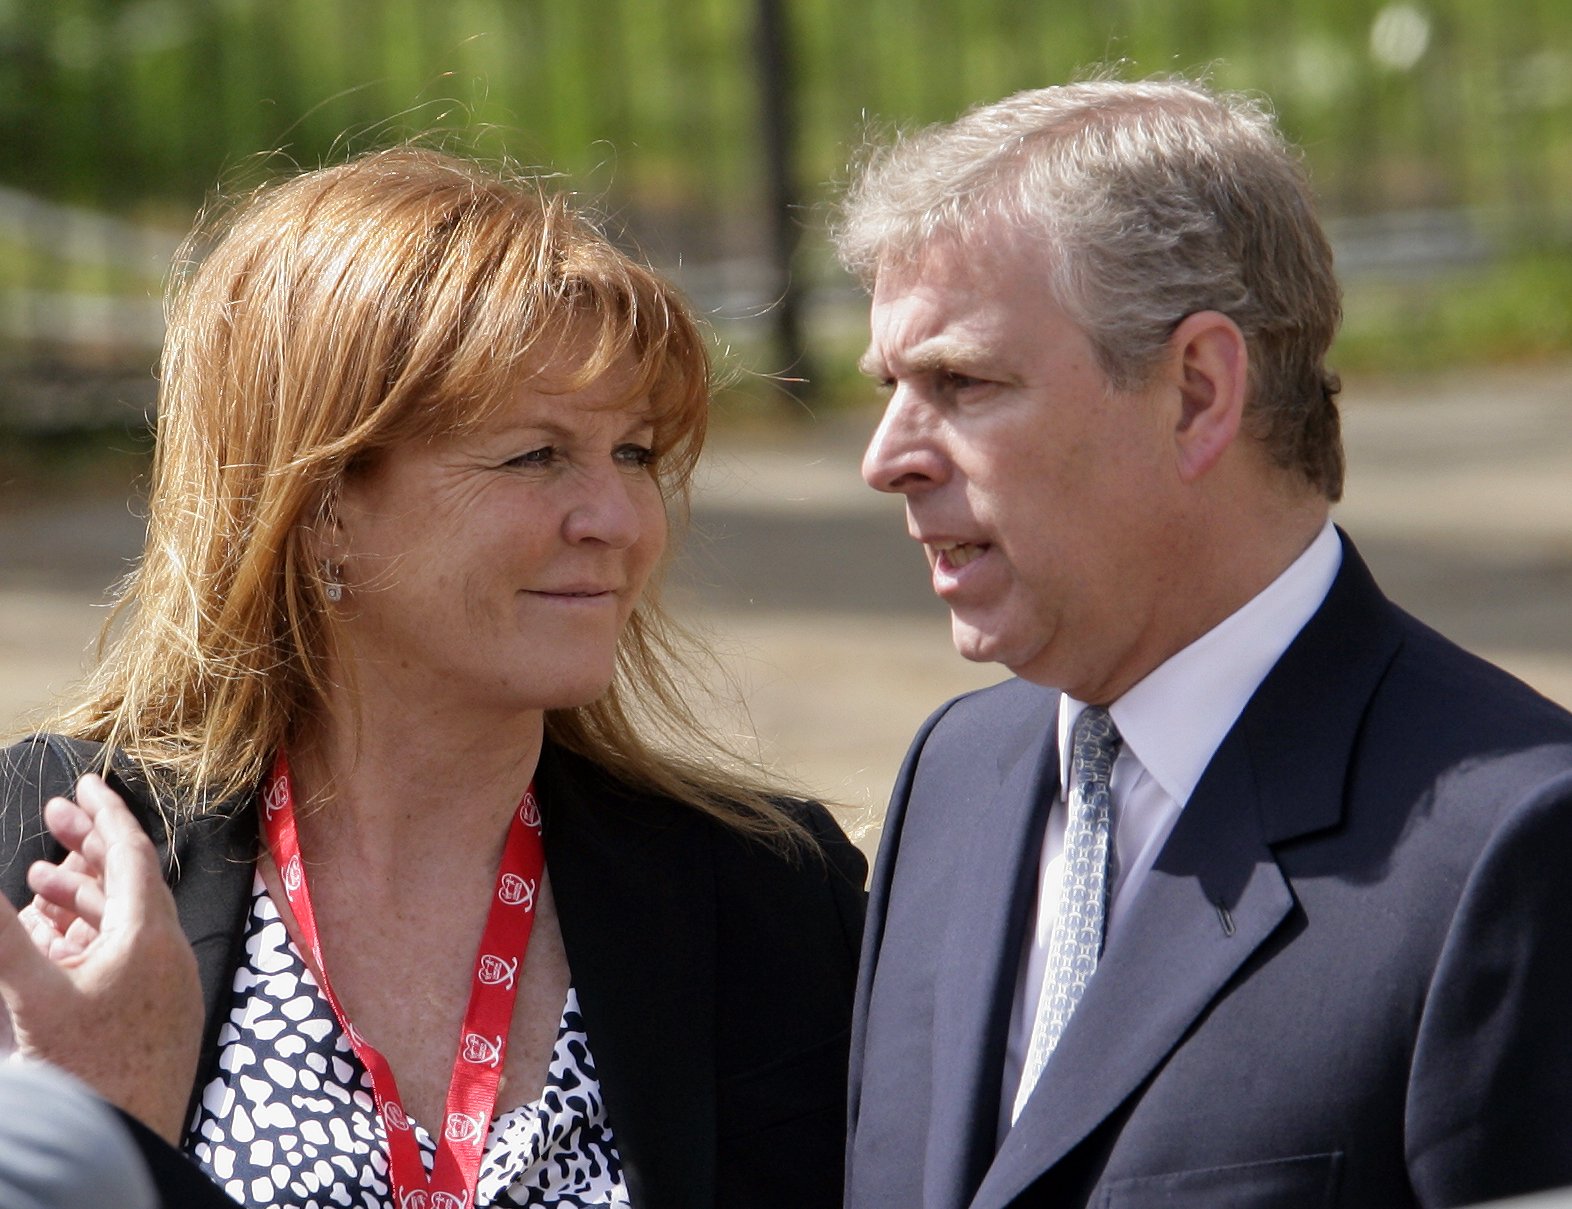 Sarah Ferguson, The Duchess of York talks with ex-husband Prince Andrew, The Duke of York on April 25, 2010, in London, England. | Source: Getty Images